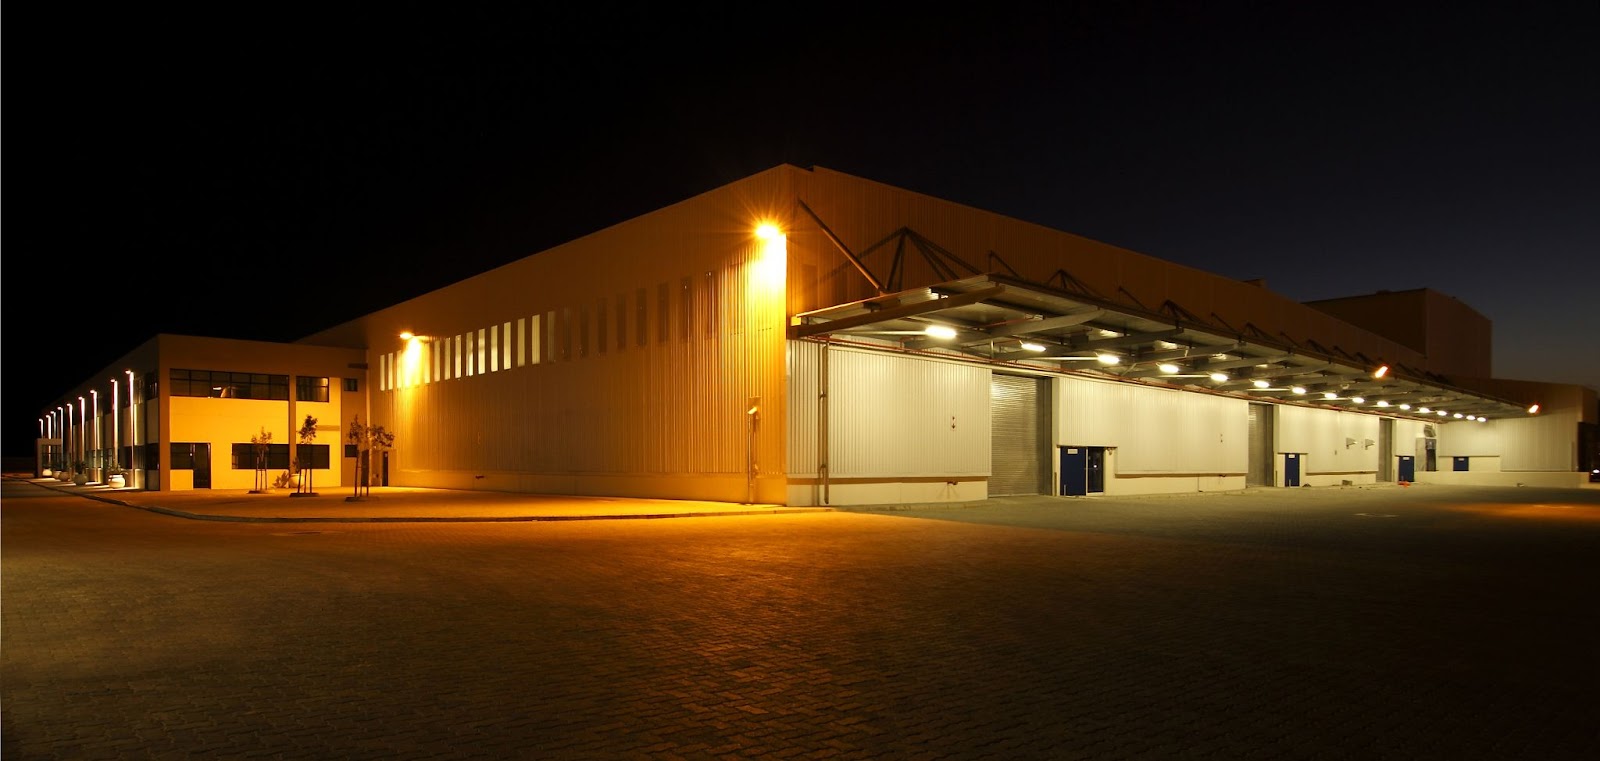 Illuminated warehouse exterior at night for security.